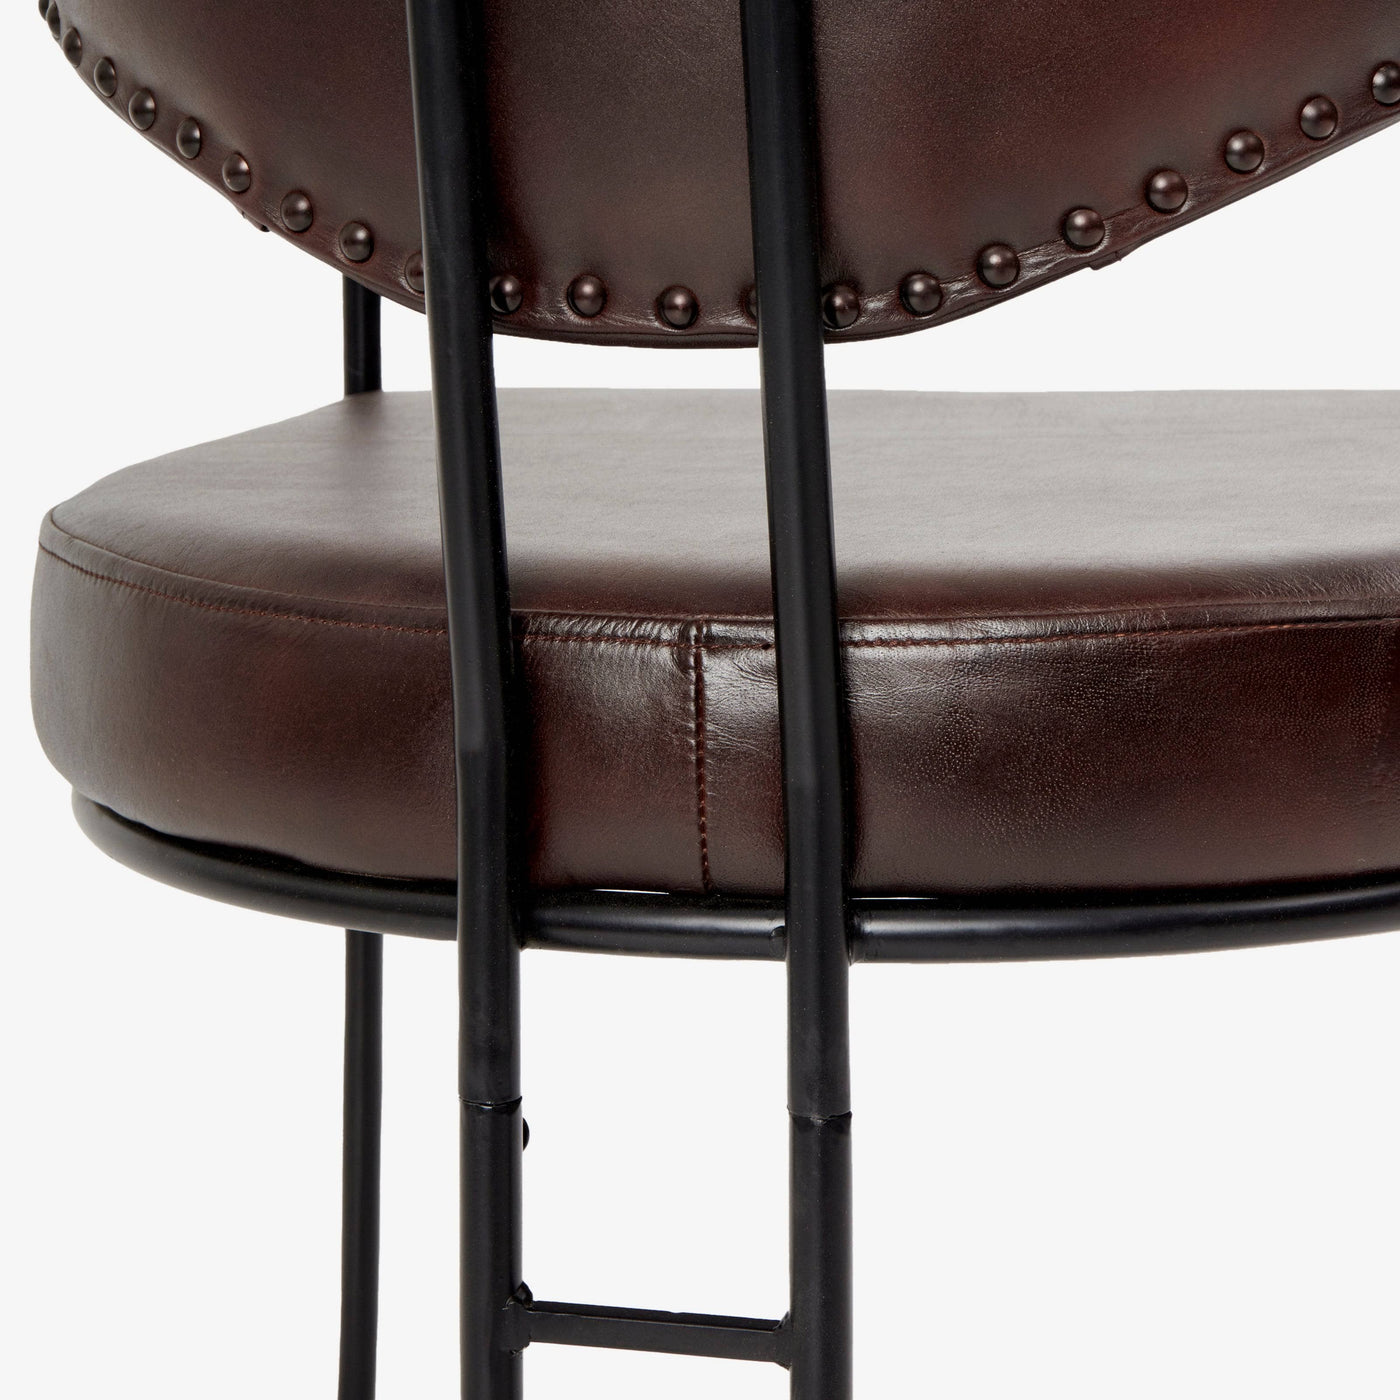 Itari Leather Armchair, Brown Dining Chairs & Benches sazy.com